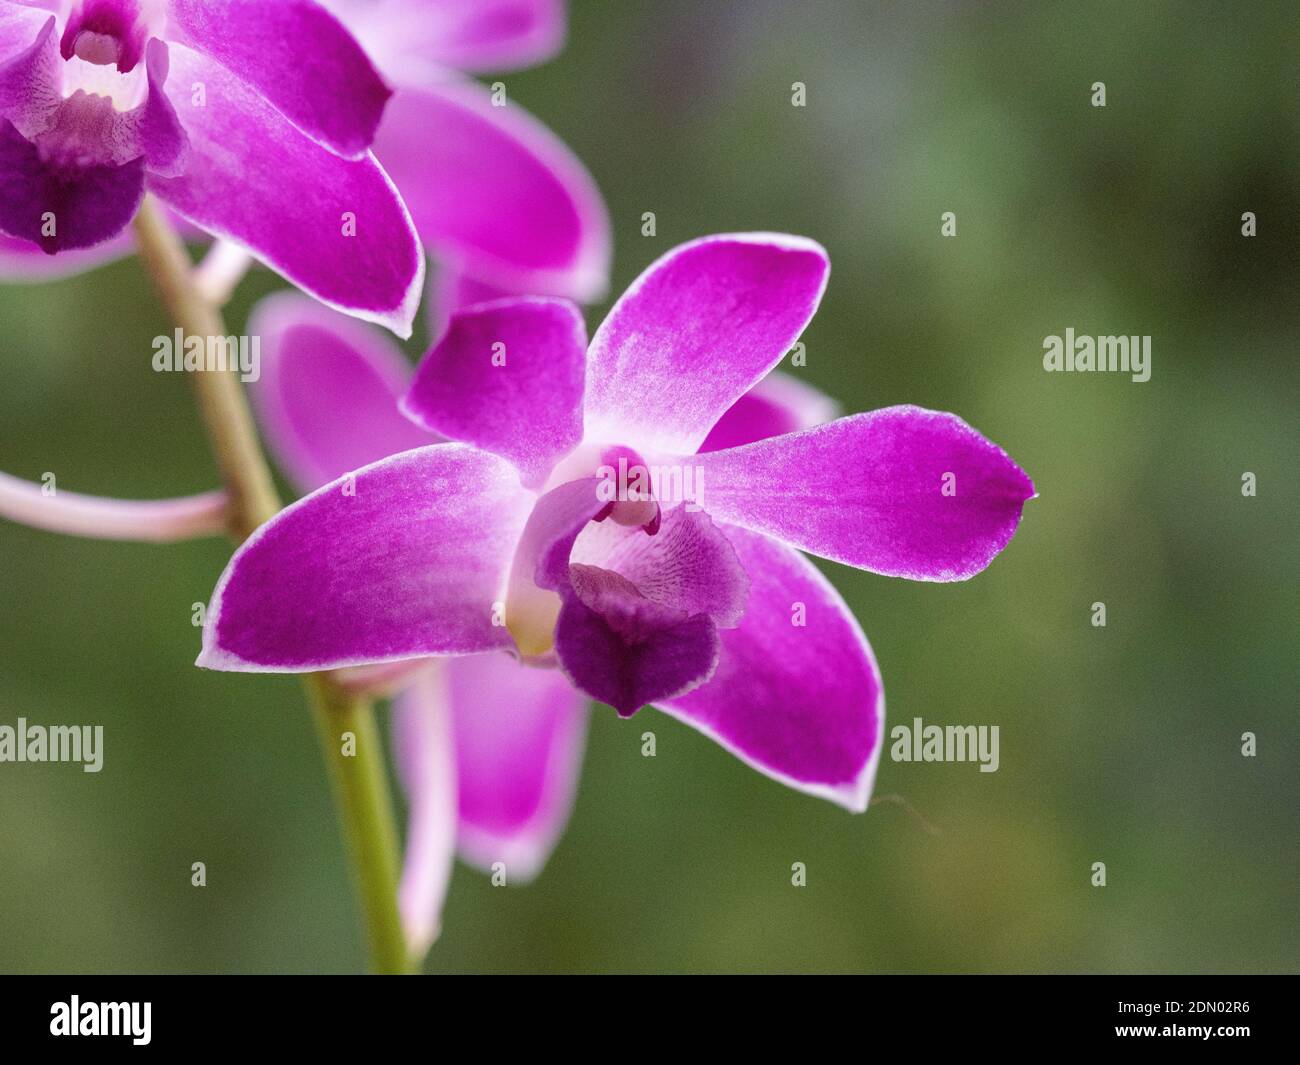 A close up of a single purple flower of a Dendrobium orchid Stock Photo